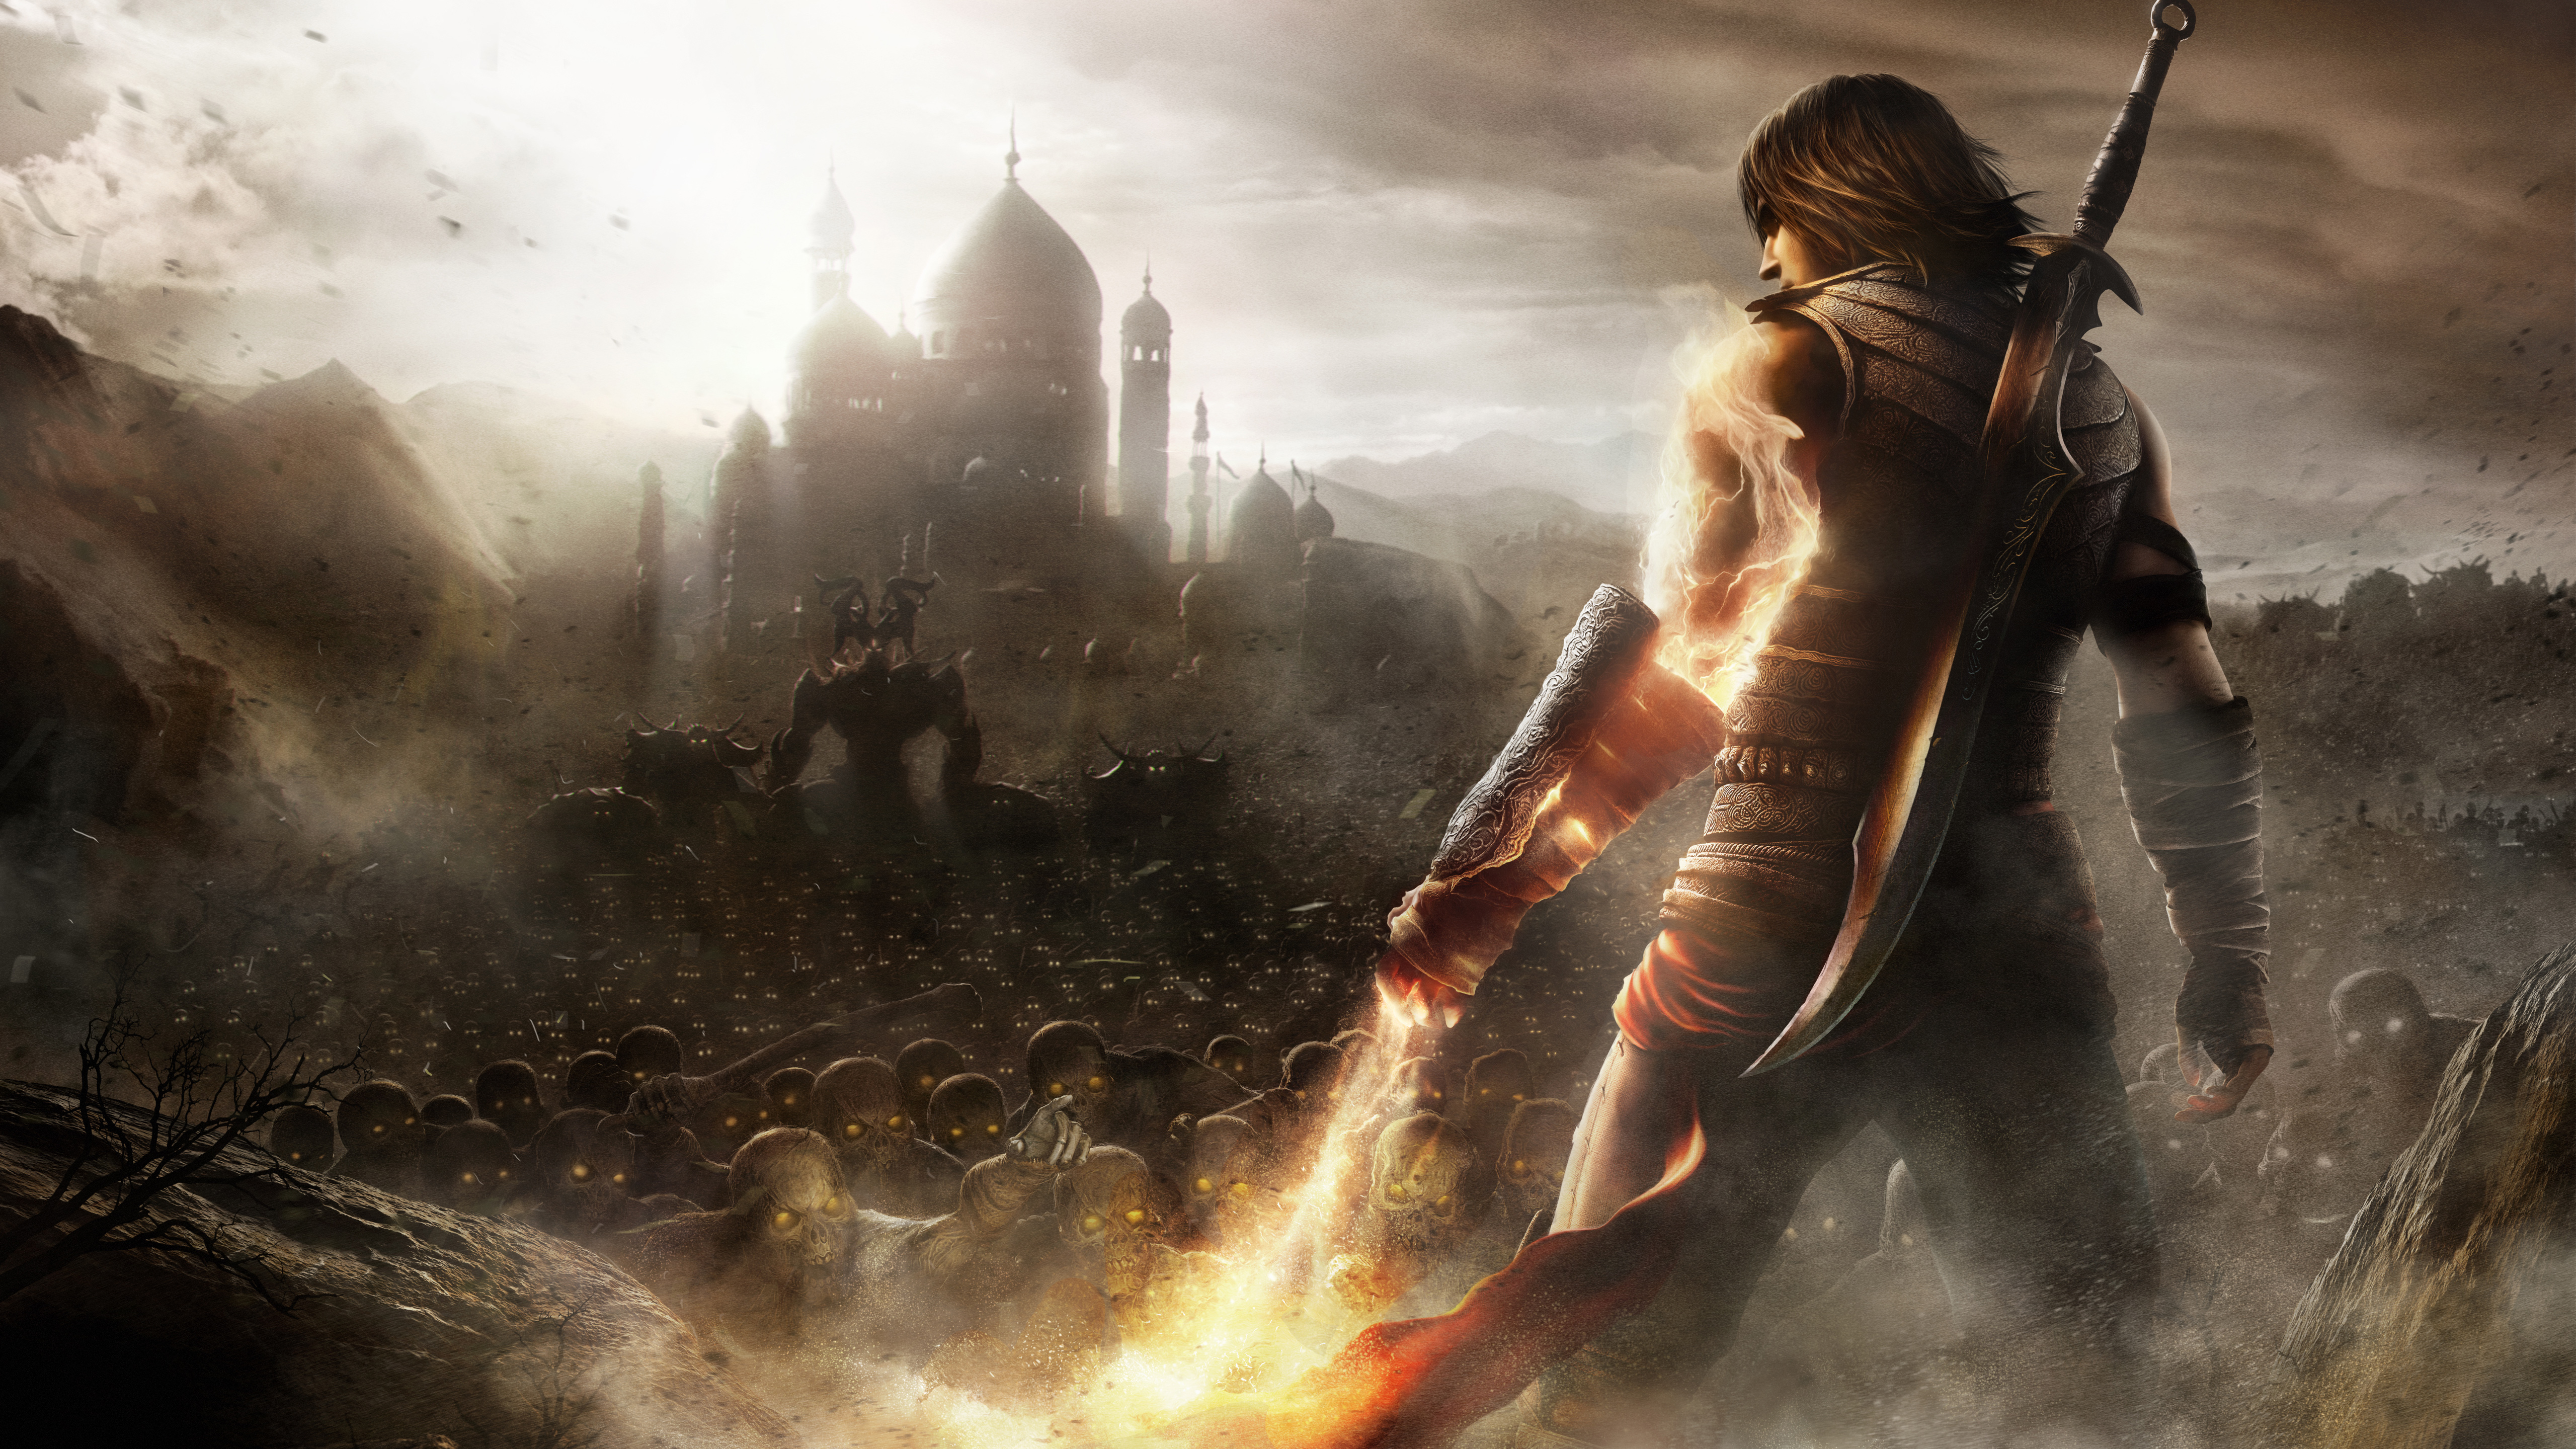 Desktop Mobiles Tablets - Prince Of Persia The Forgotten Sands , HD Wallpaper & Backgrounds